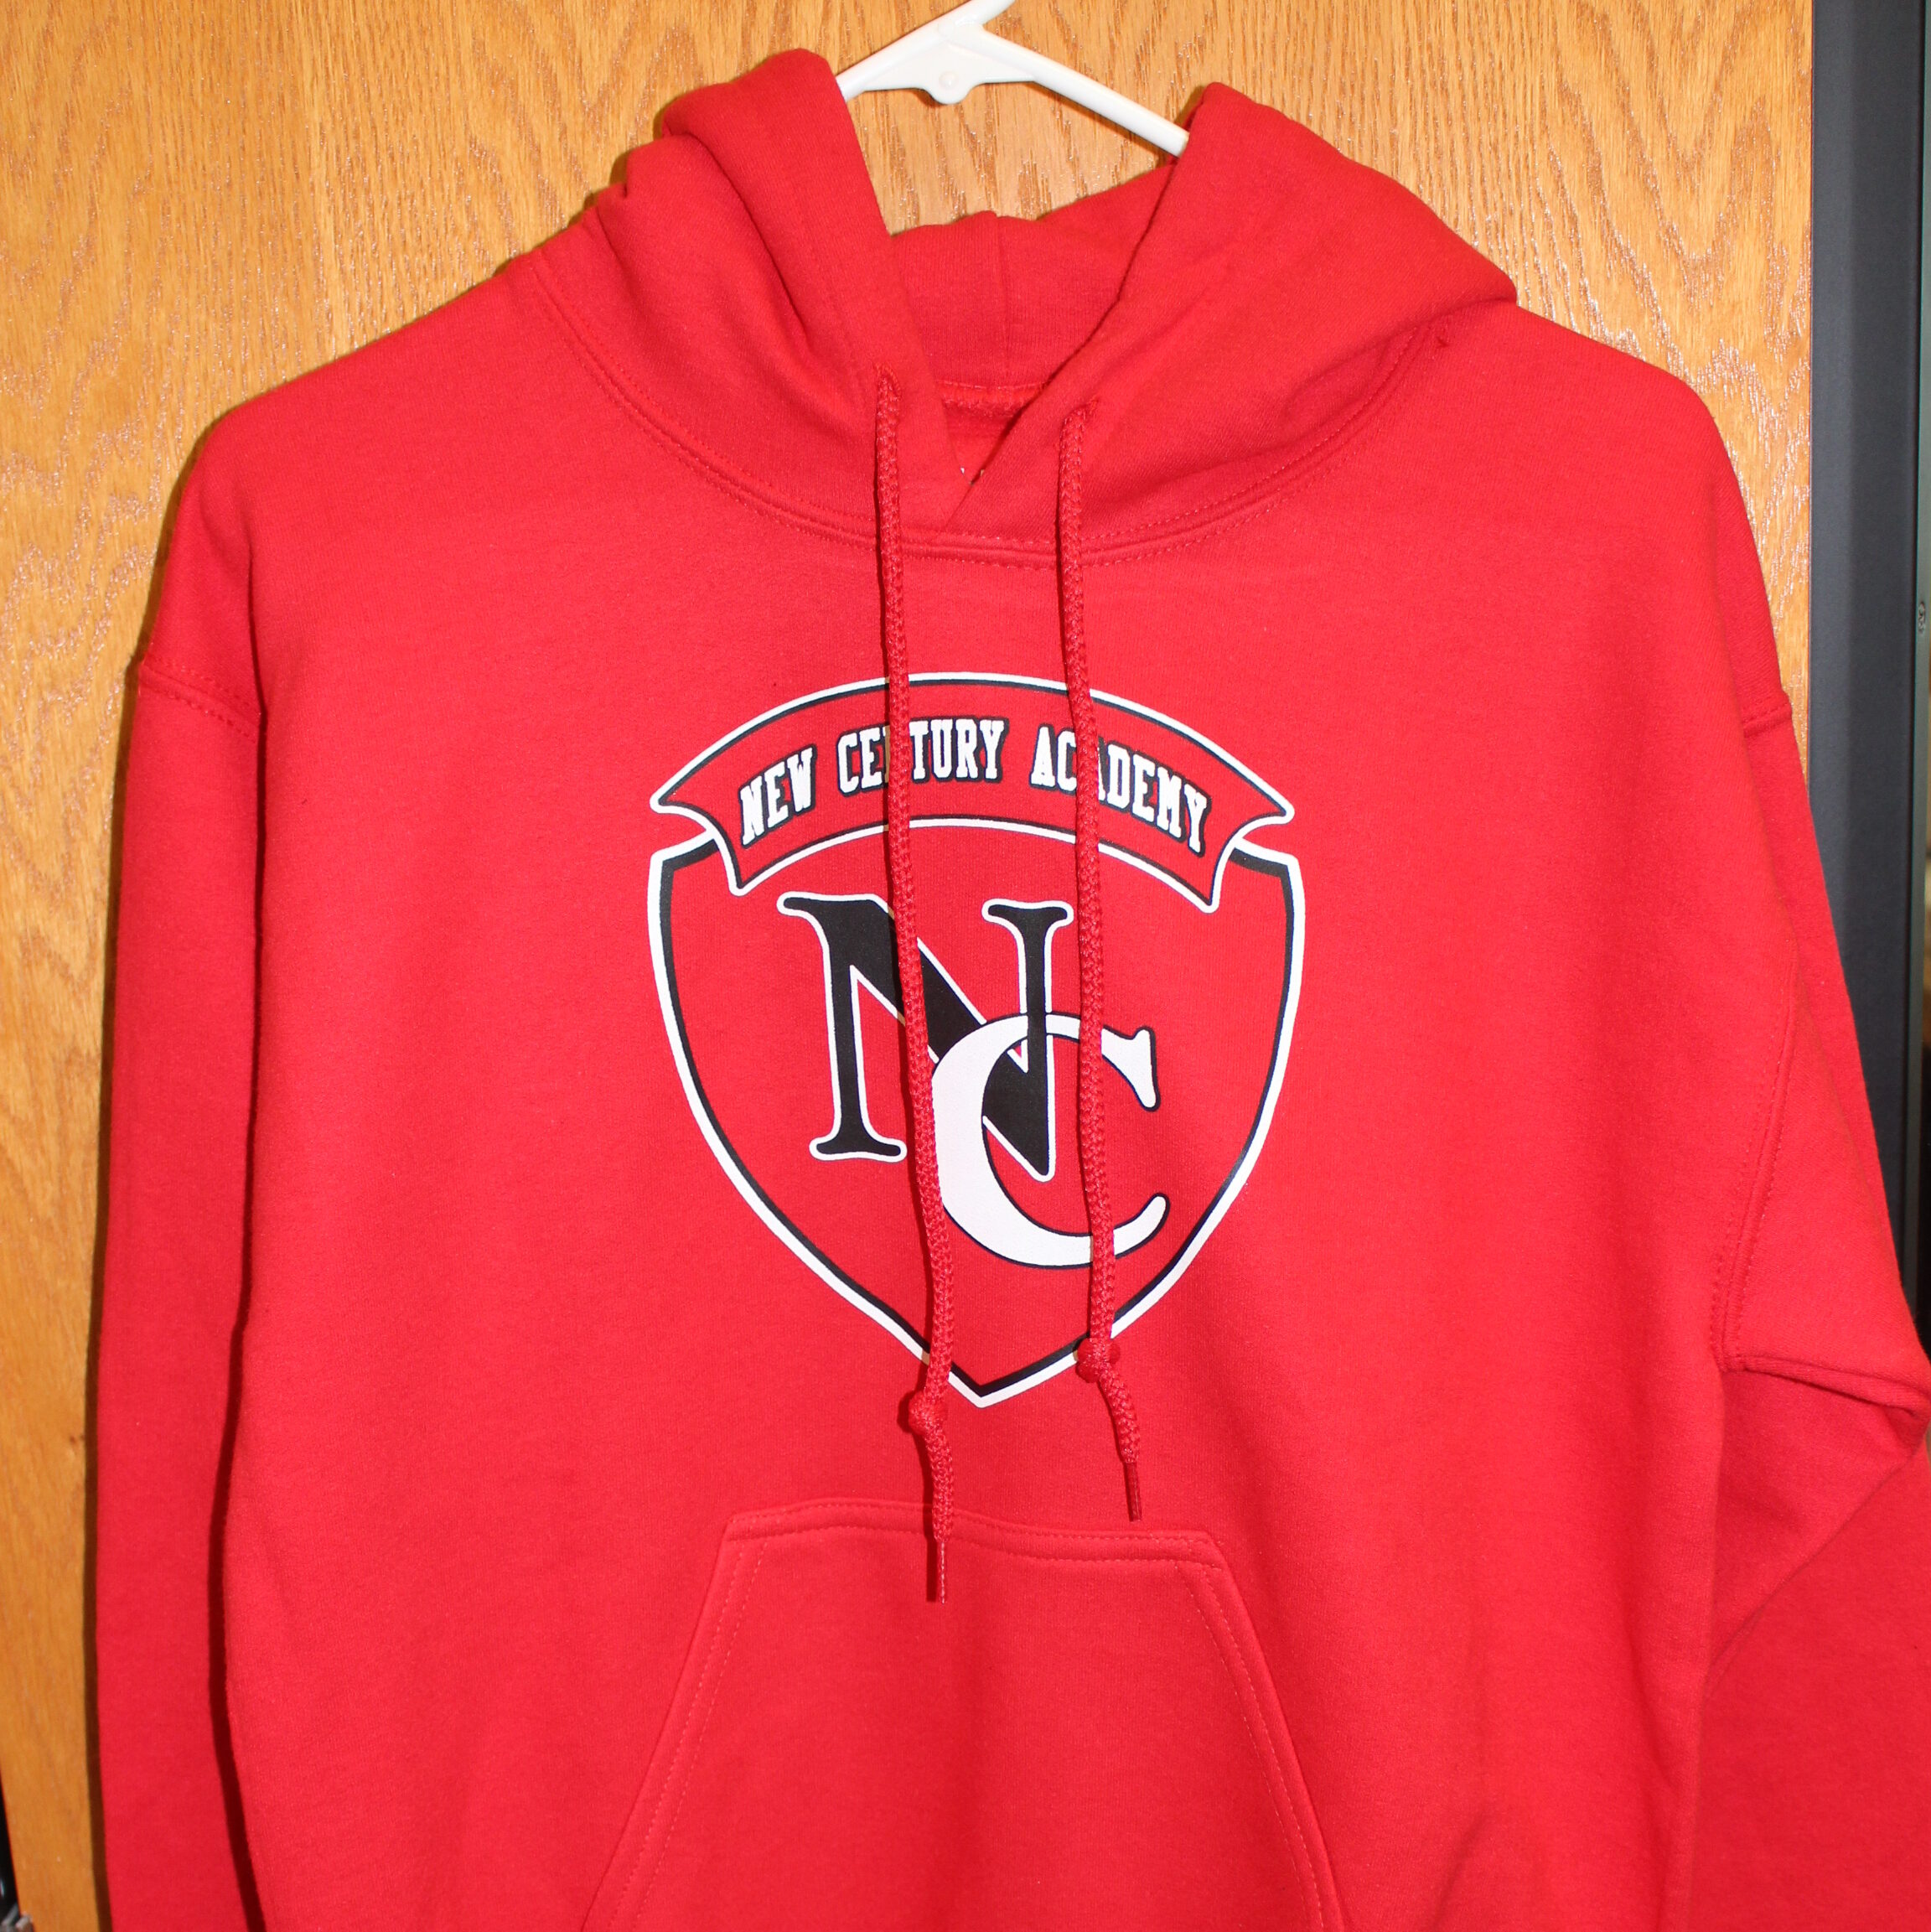 Red sweatshirt with the New Century Academy logo on it